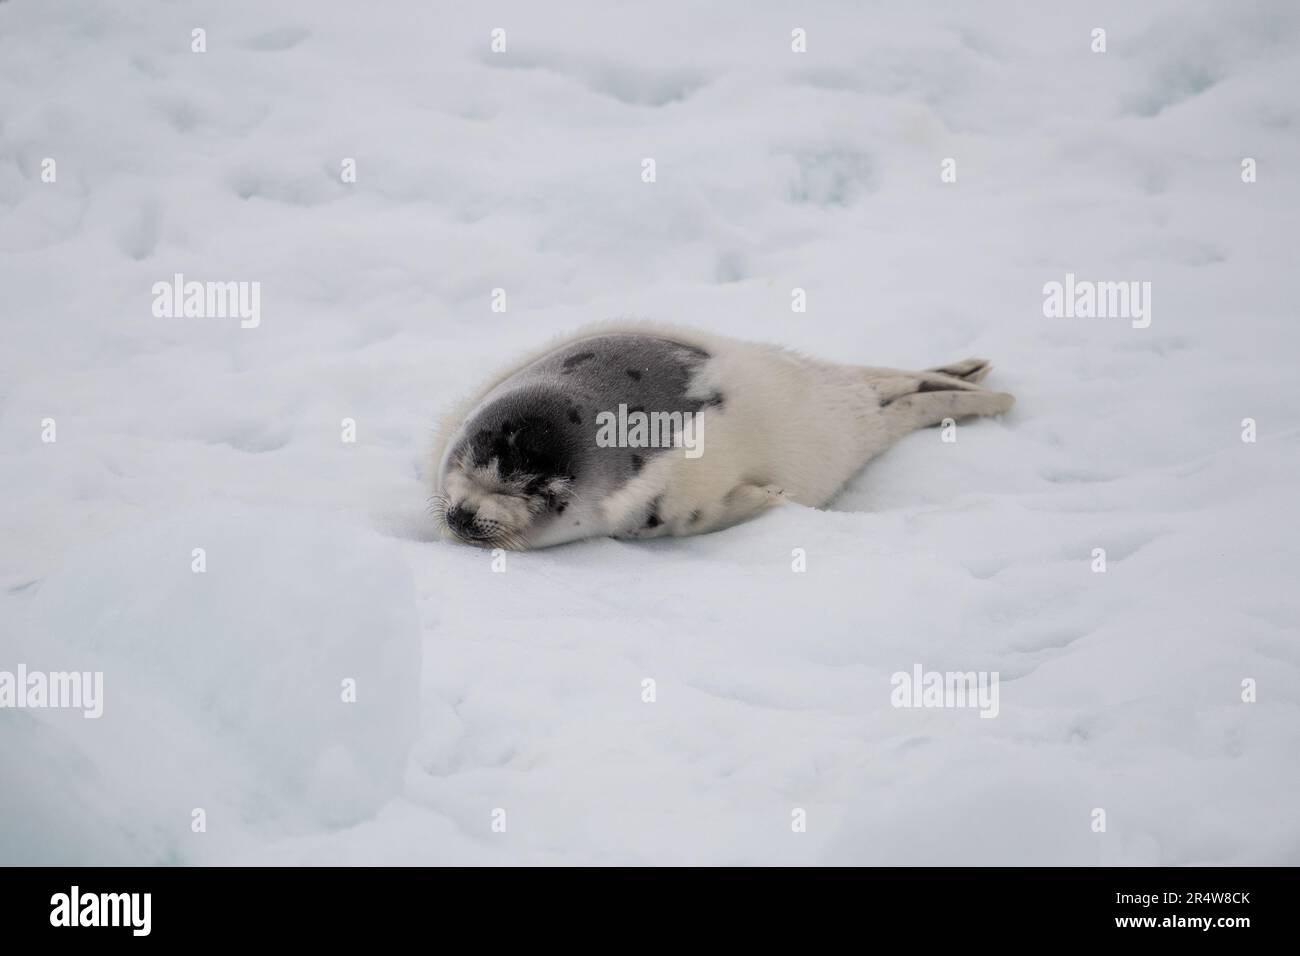 A small baby whitecoat harp seal or harbor seal floating on white snow and slop ice. The wild gray seal has long whiskers, a sad face, light color fur Stock Photo